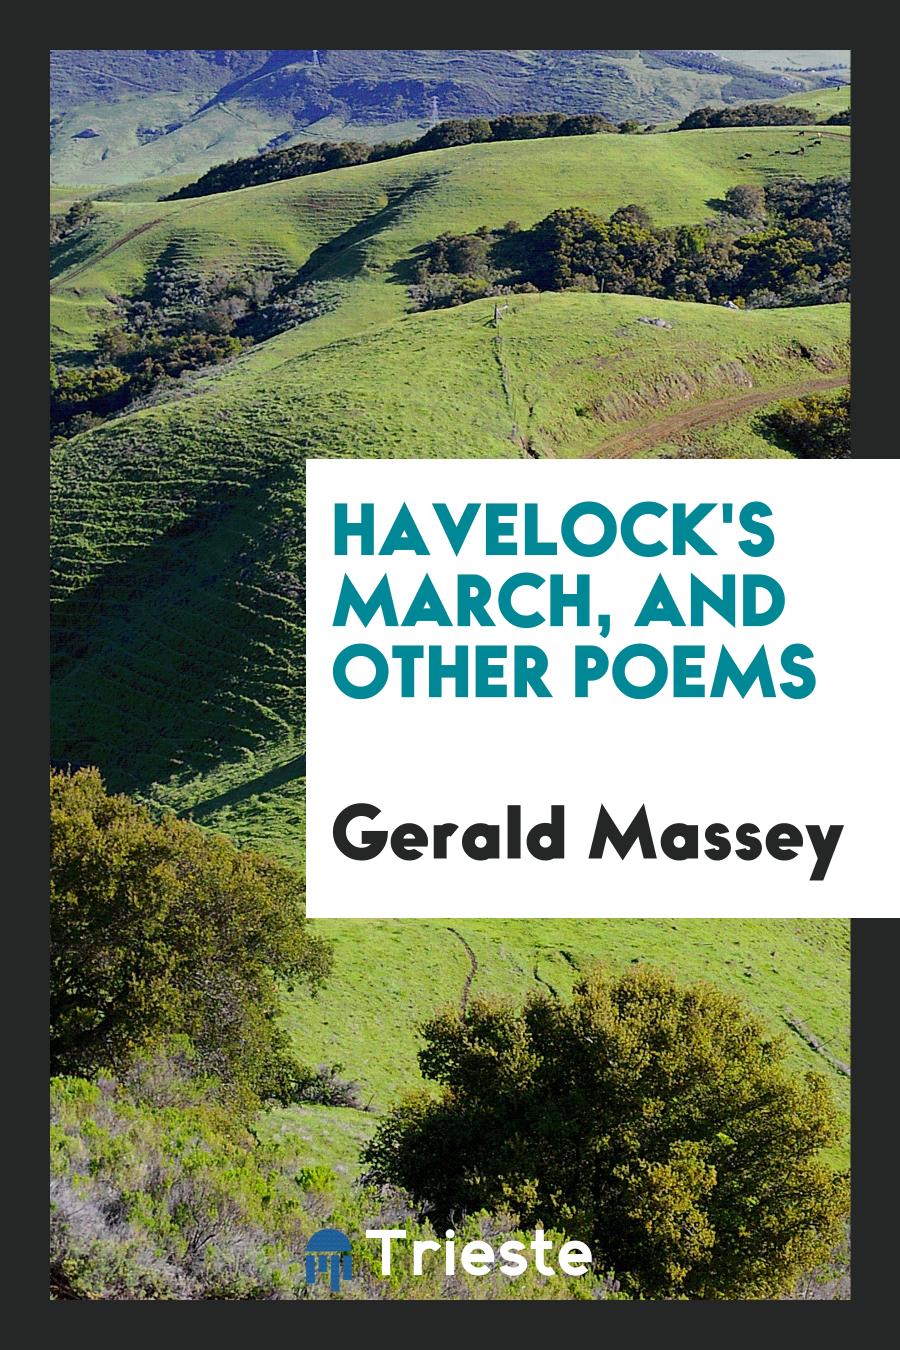 Havelock's March, and Other Poems